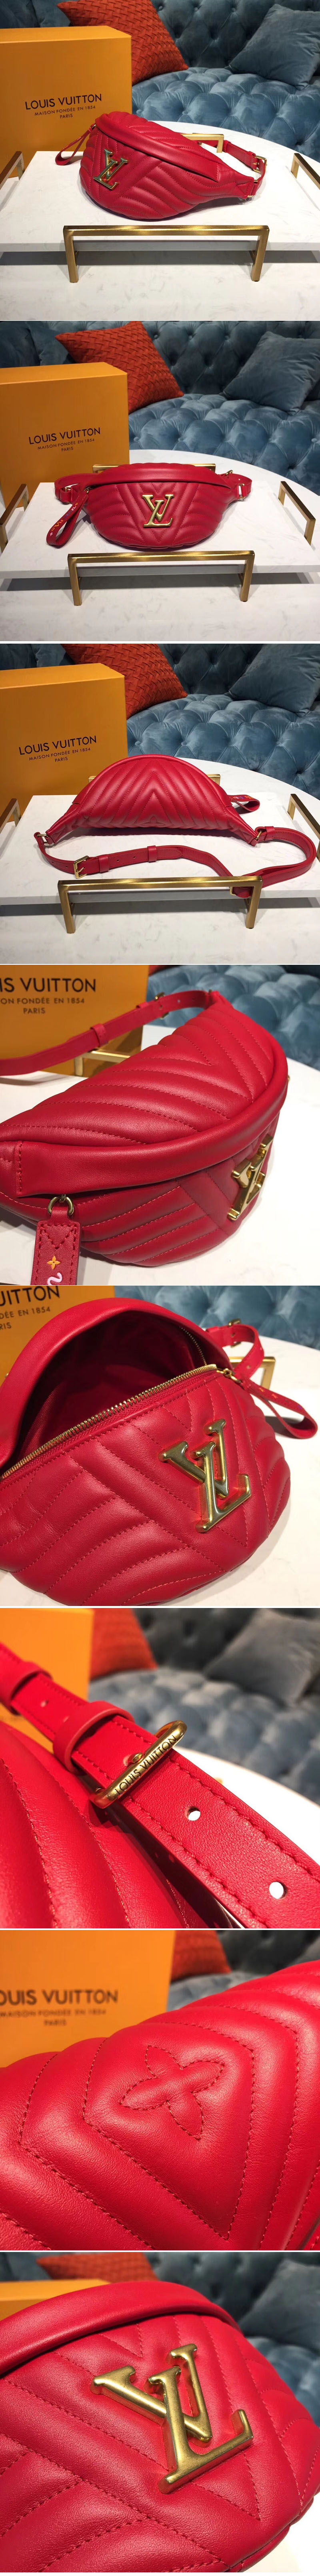 Replica Louis Vuitton M53750 LV New Wave Bumbag Red Leather